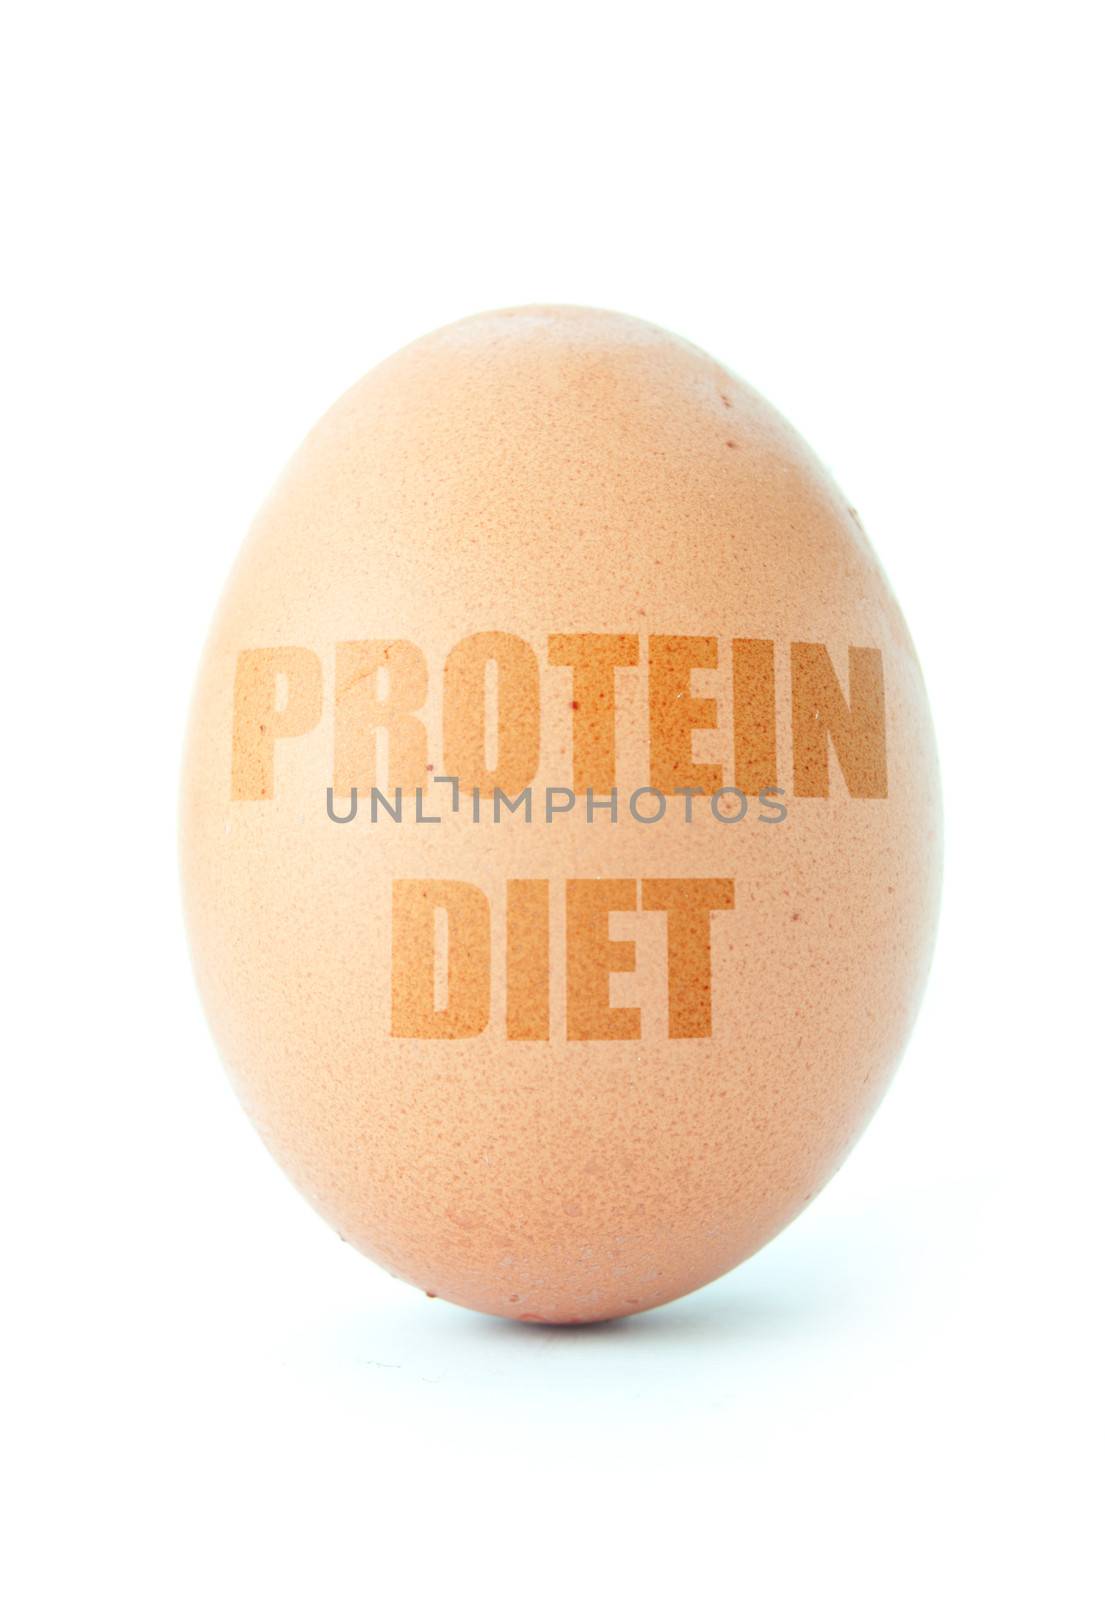 Protein diet labeled egg over a white background